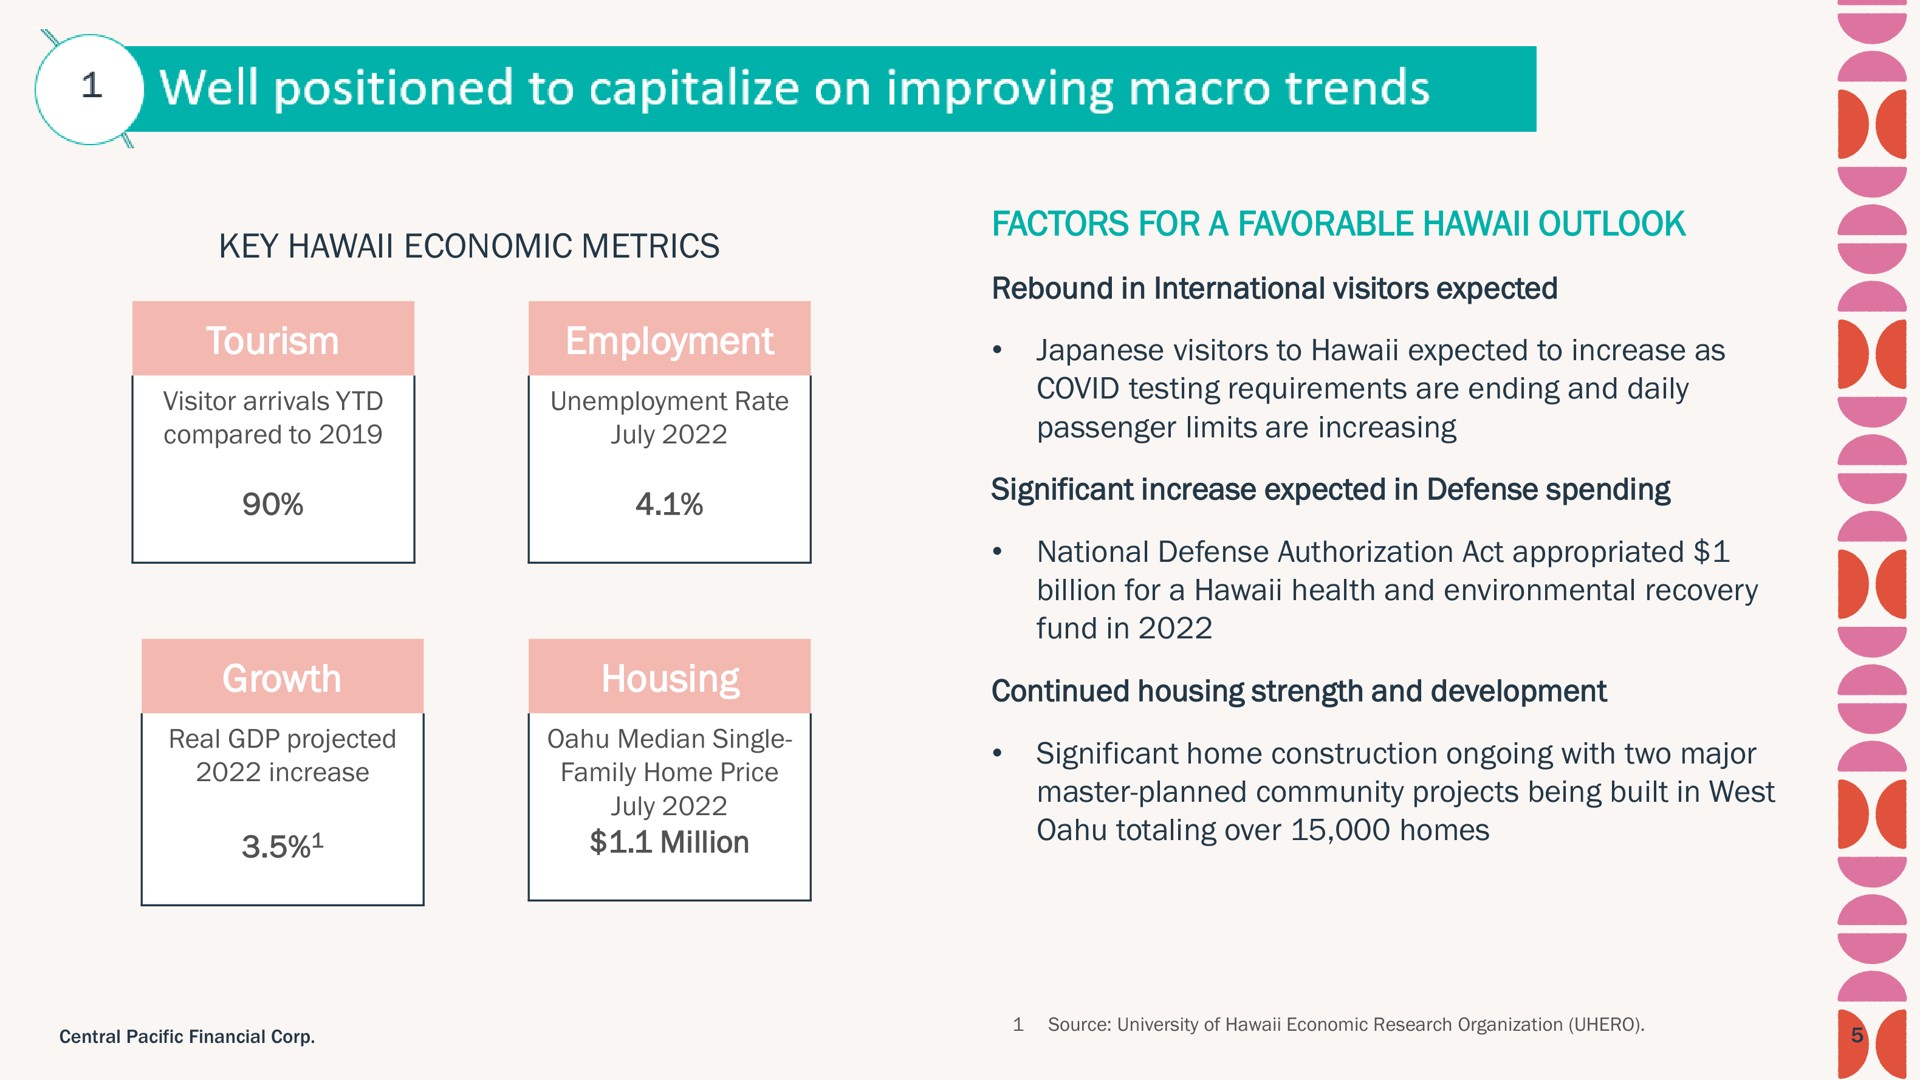 well positioned to capitalize on improving macro trends | Central Pacific Financial